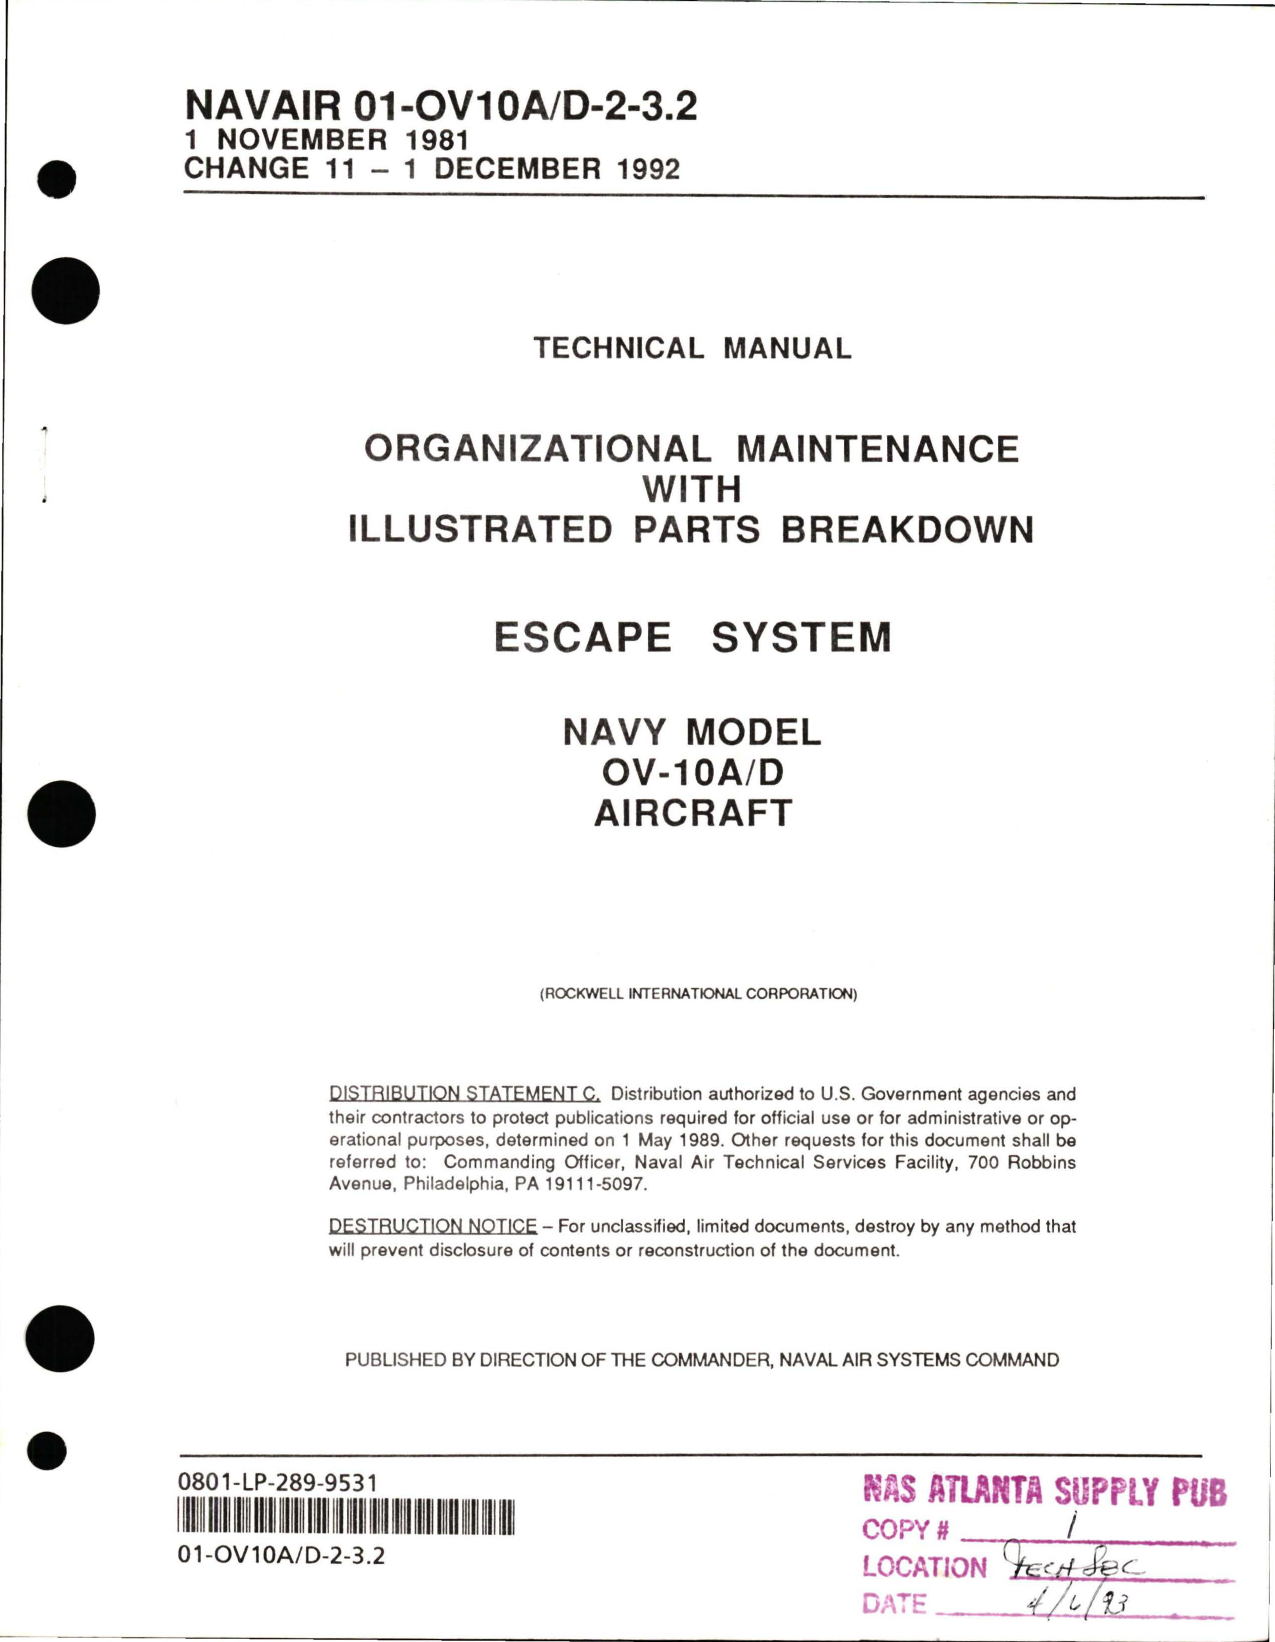 Sample page 5 from AirCorps Library document: Organizational Maintenance with Illustrated Parts for Escape System for OV-10A/D